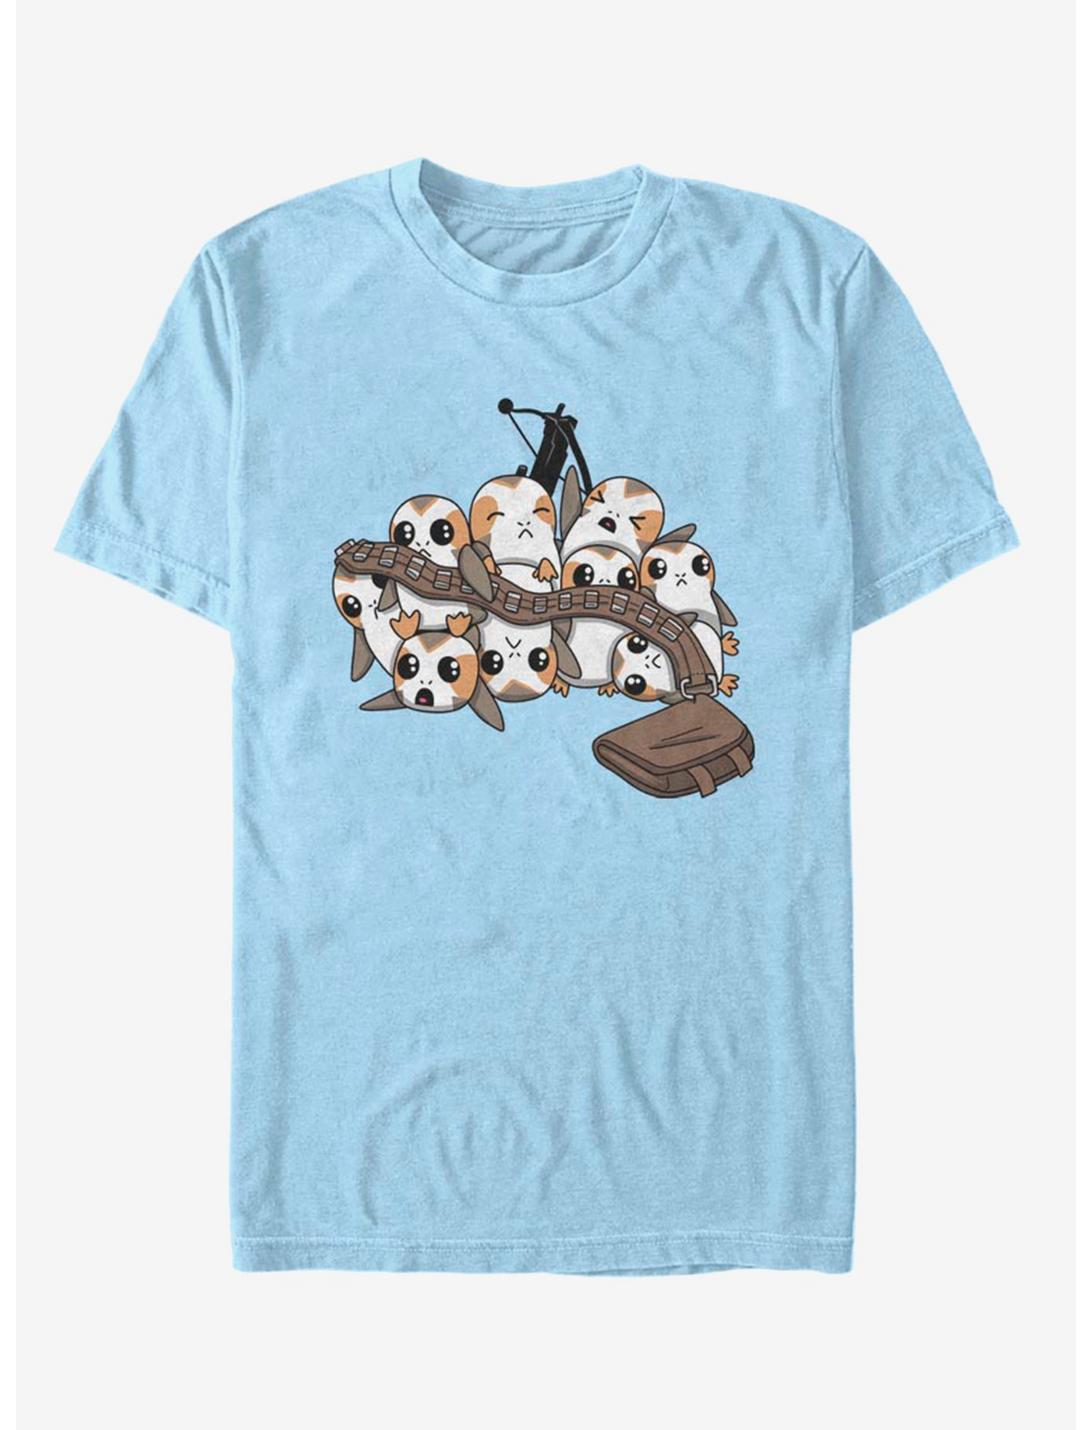 Star Wars: The Last Jedi Porg Pile And Chewbacca T-Shirt, LT BLUE, hi-res